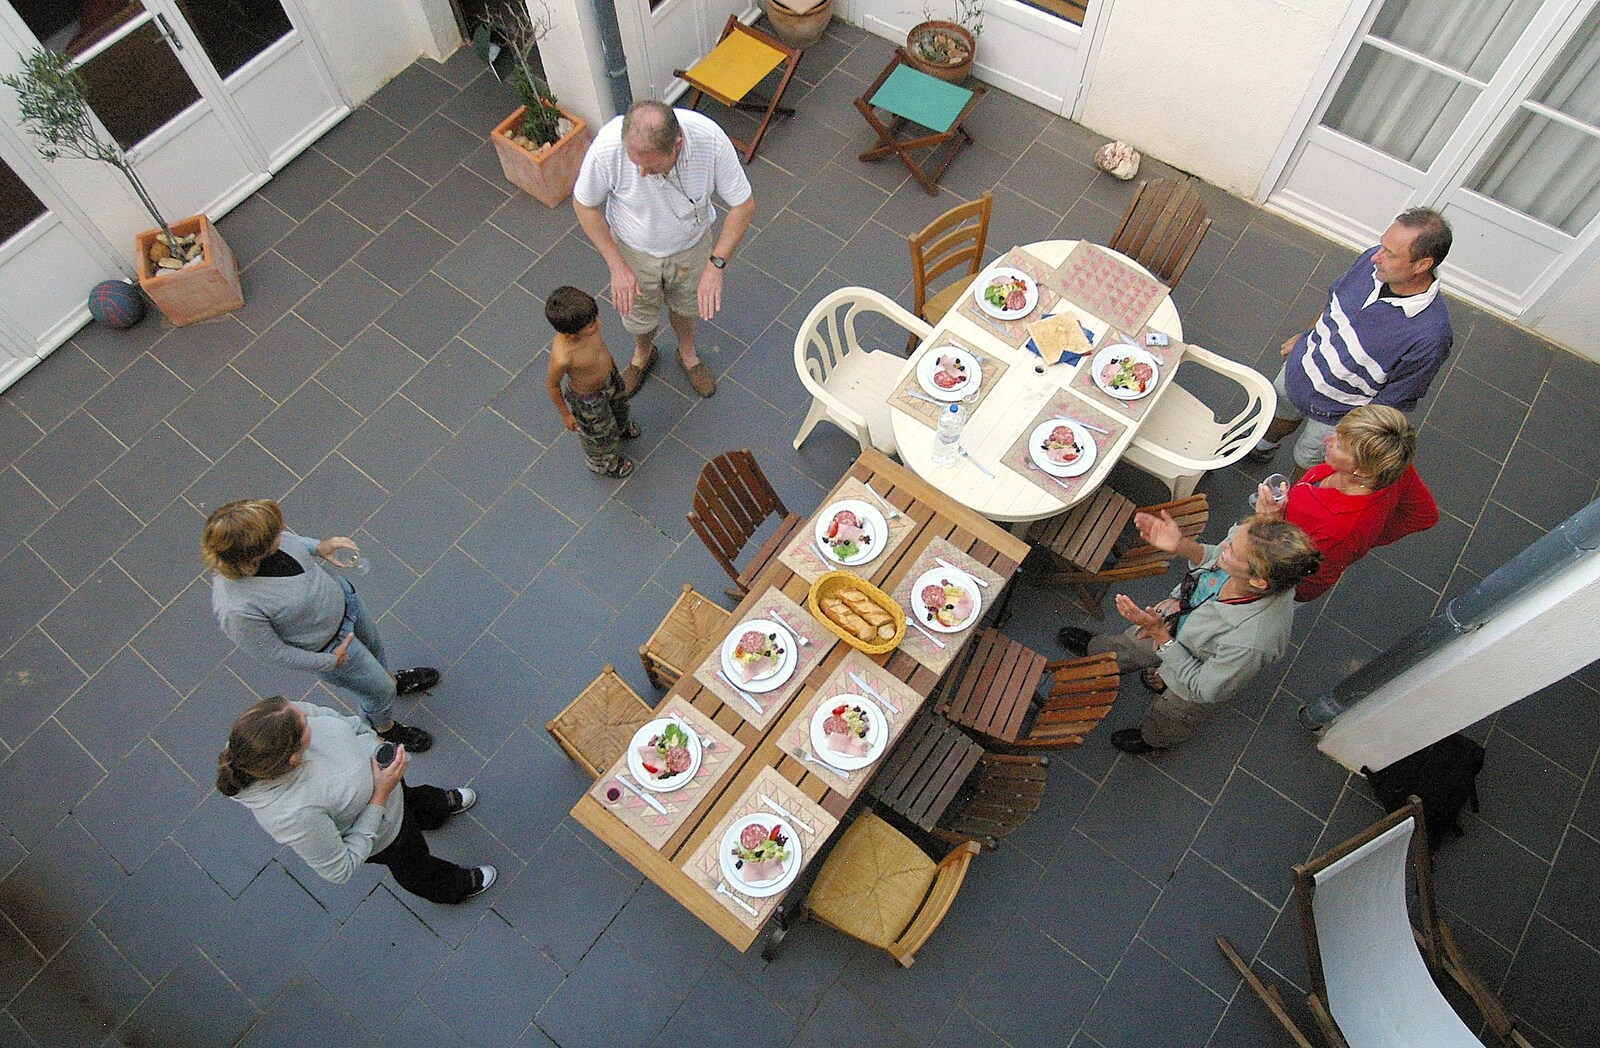 Lunch is served: people mill around from A Roussillon Farmhouse, Fourques, Perpignan, France - 17th September 2006